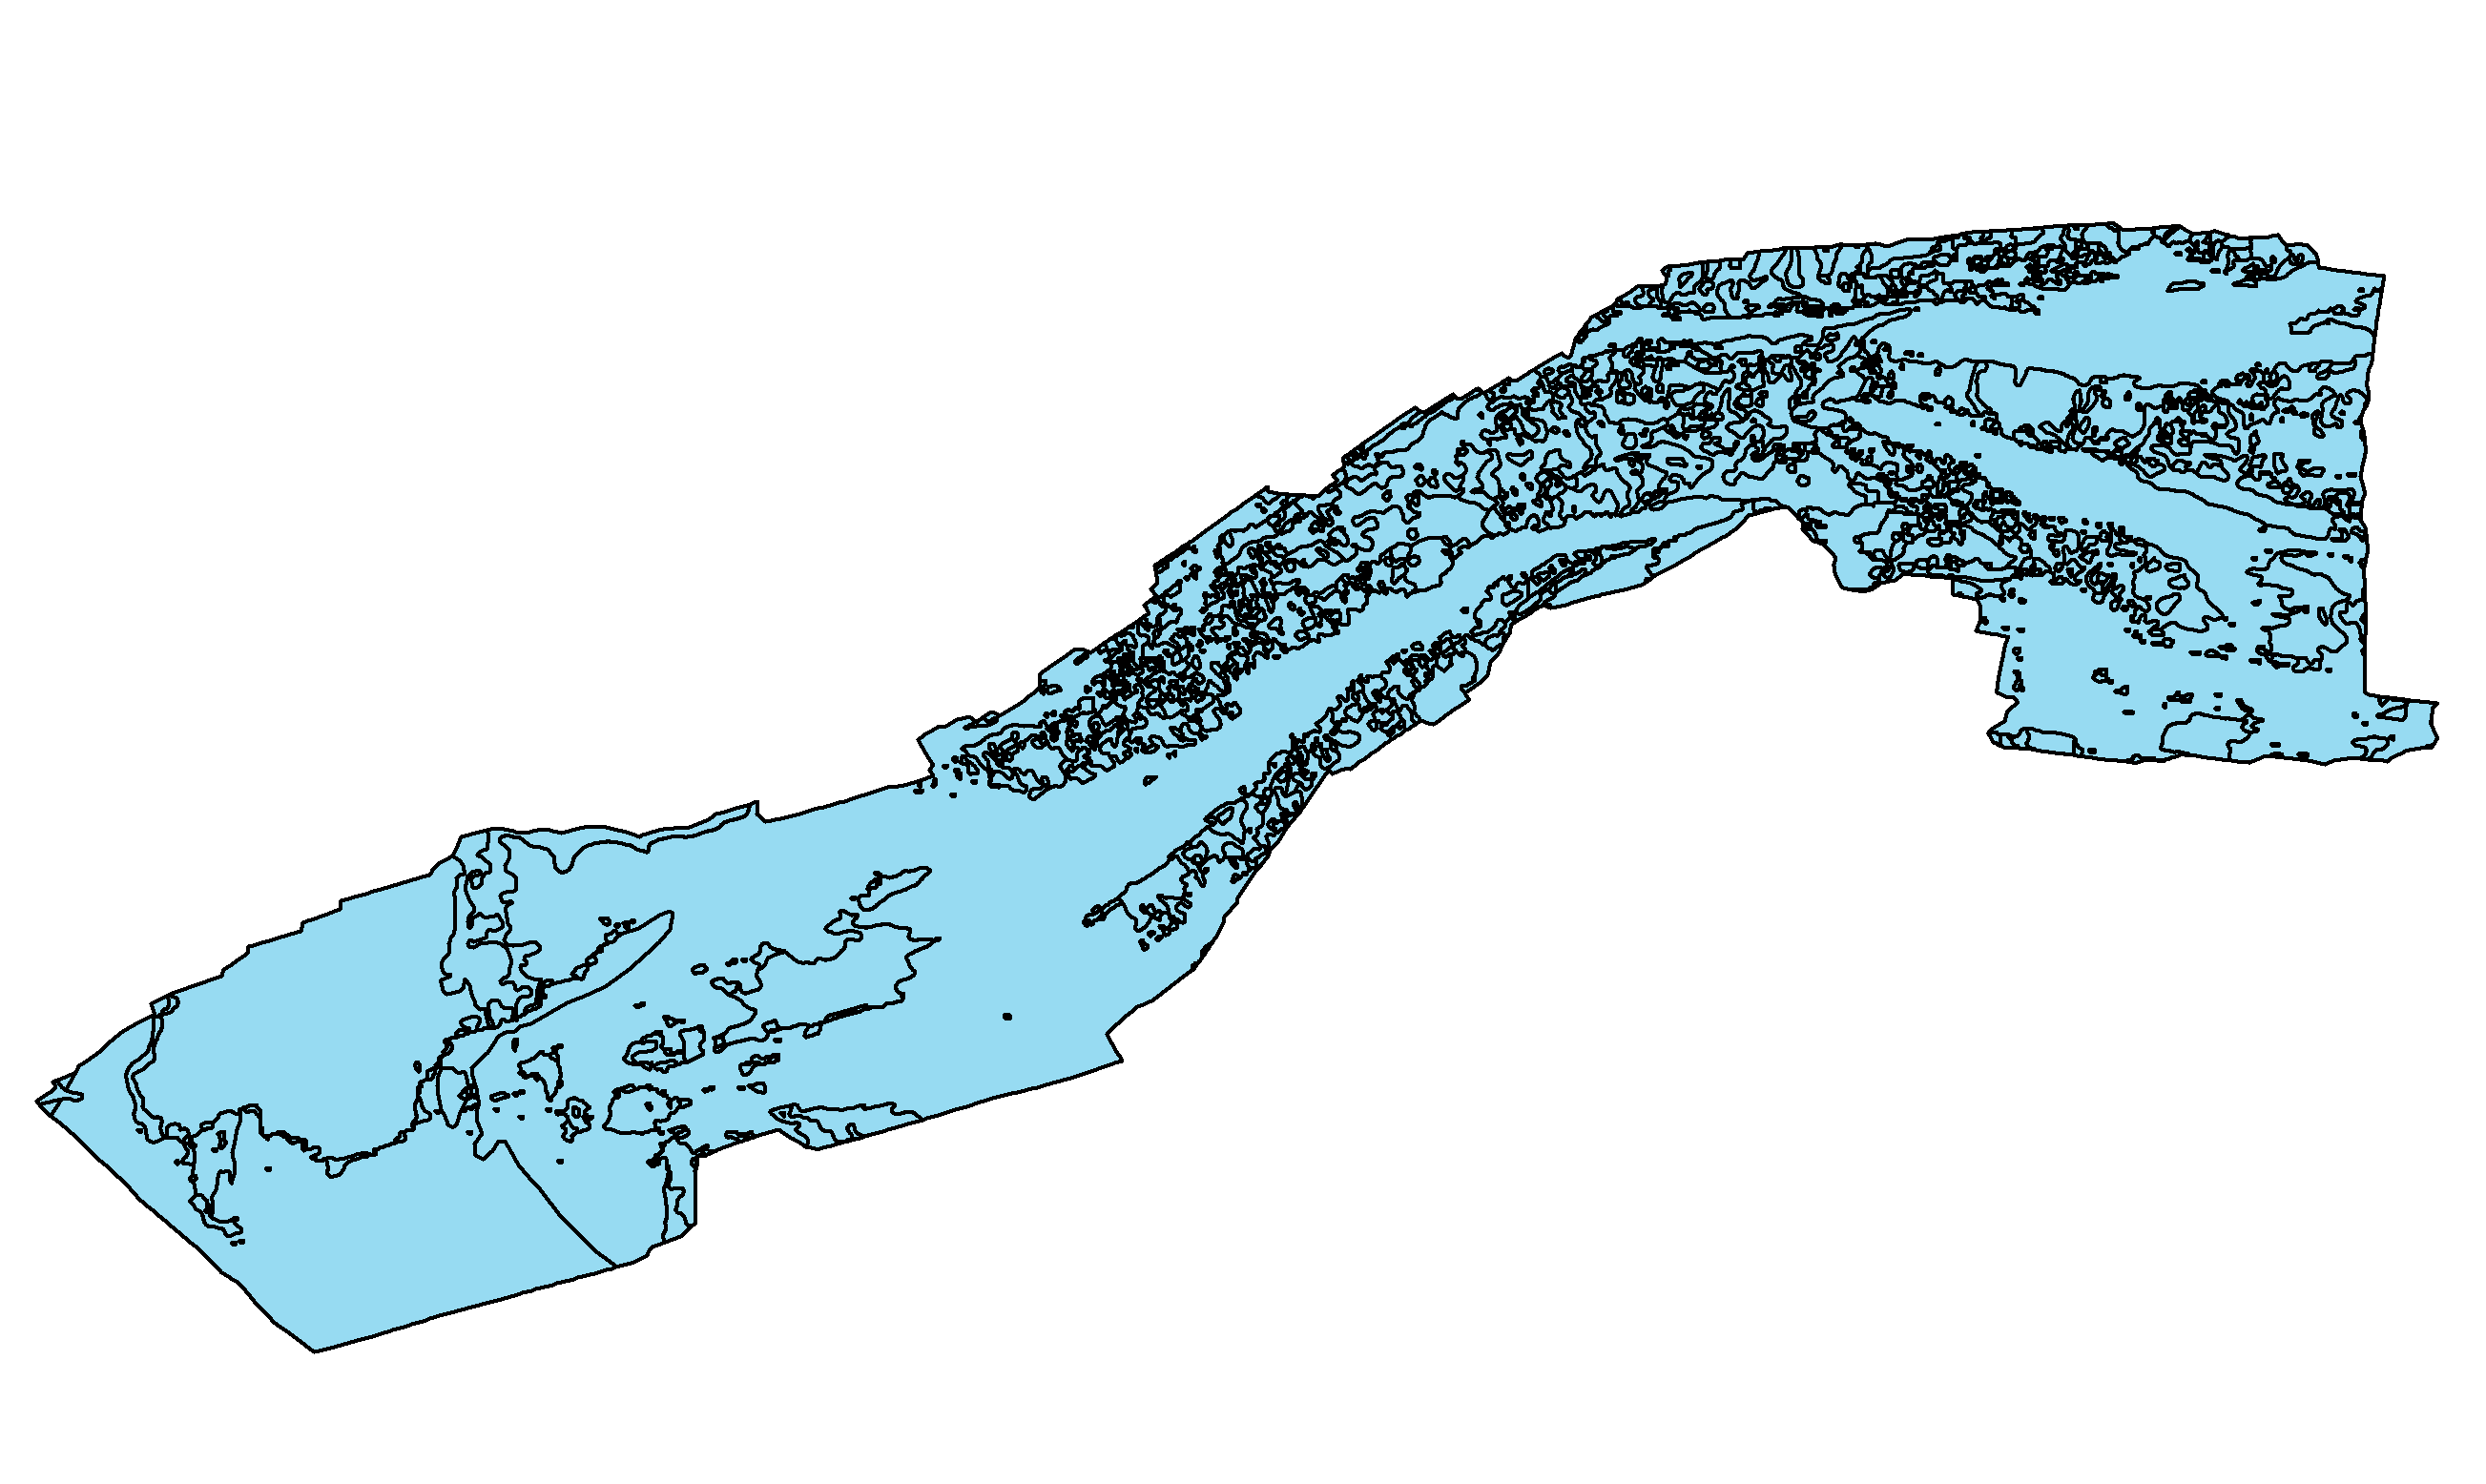 Image of the surficial geology shapefile for Vineyard and western Nantucket Sounds